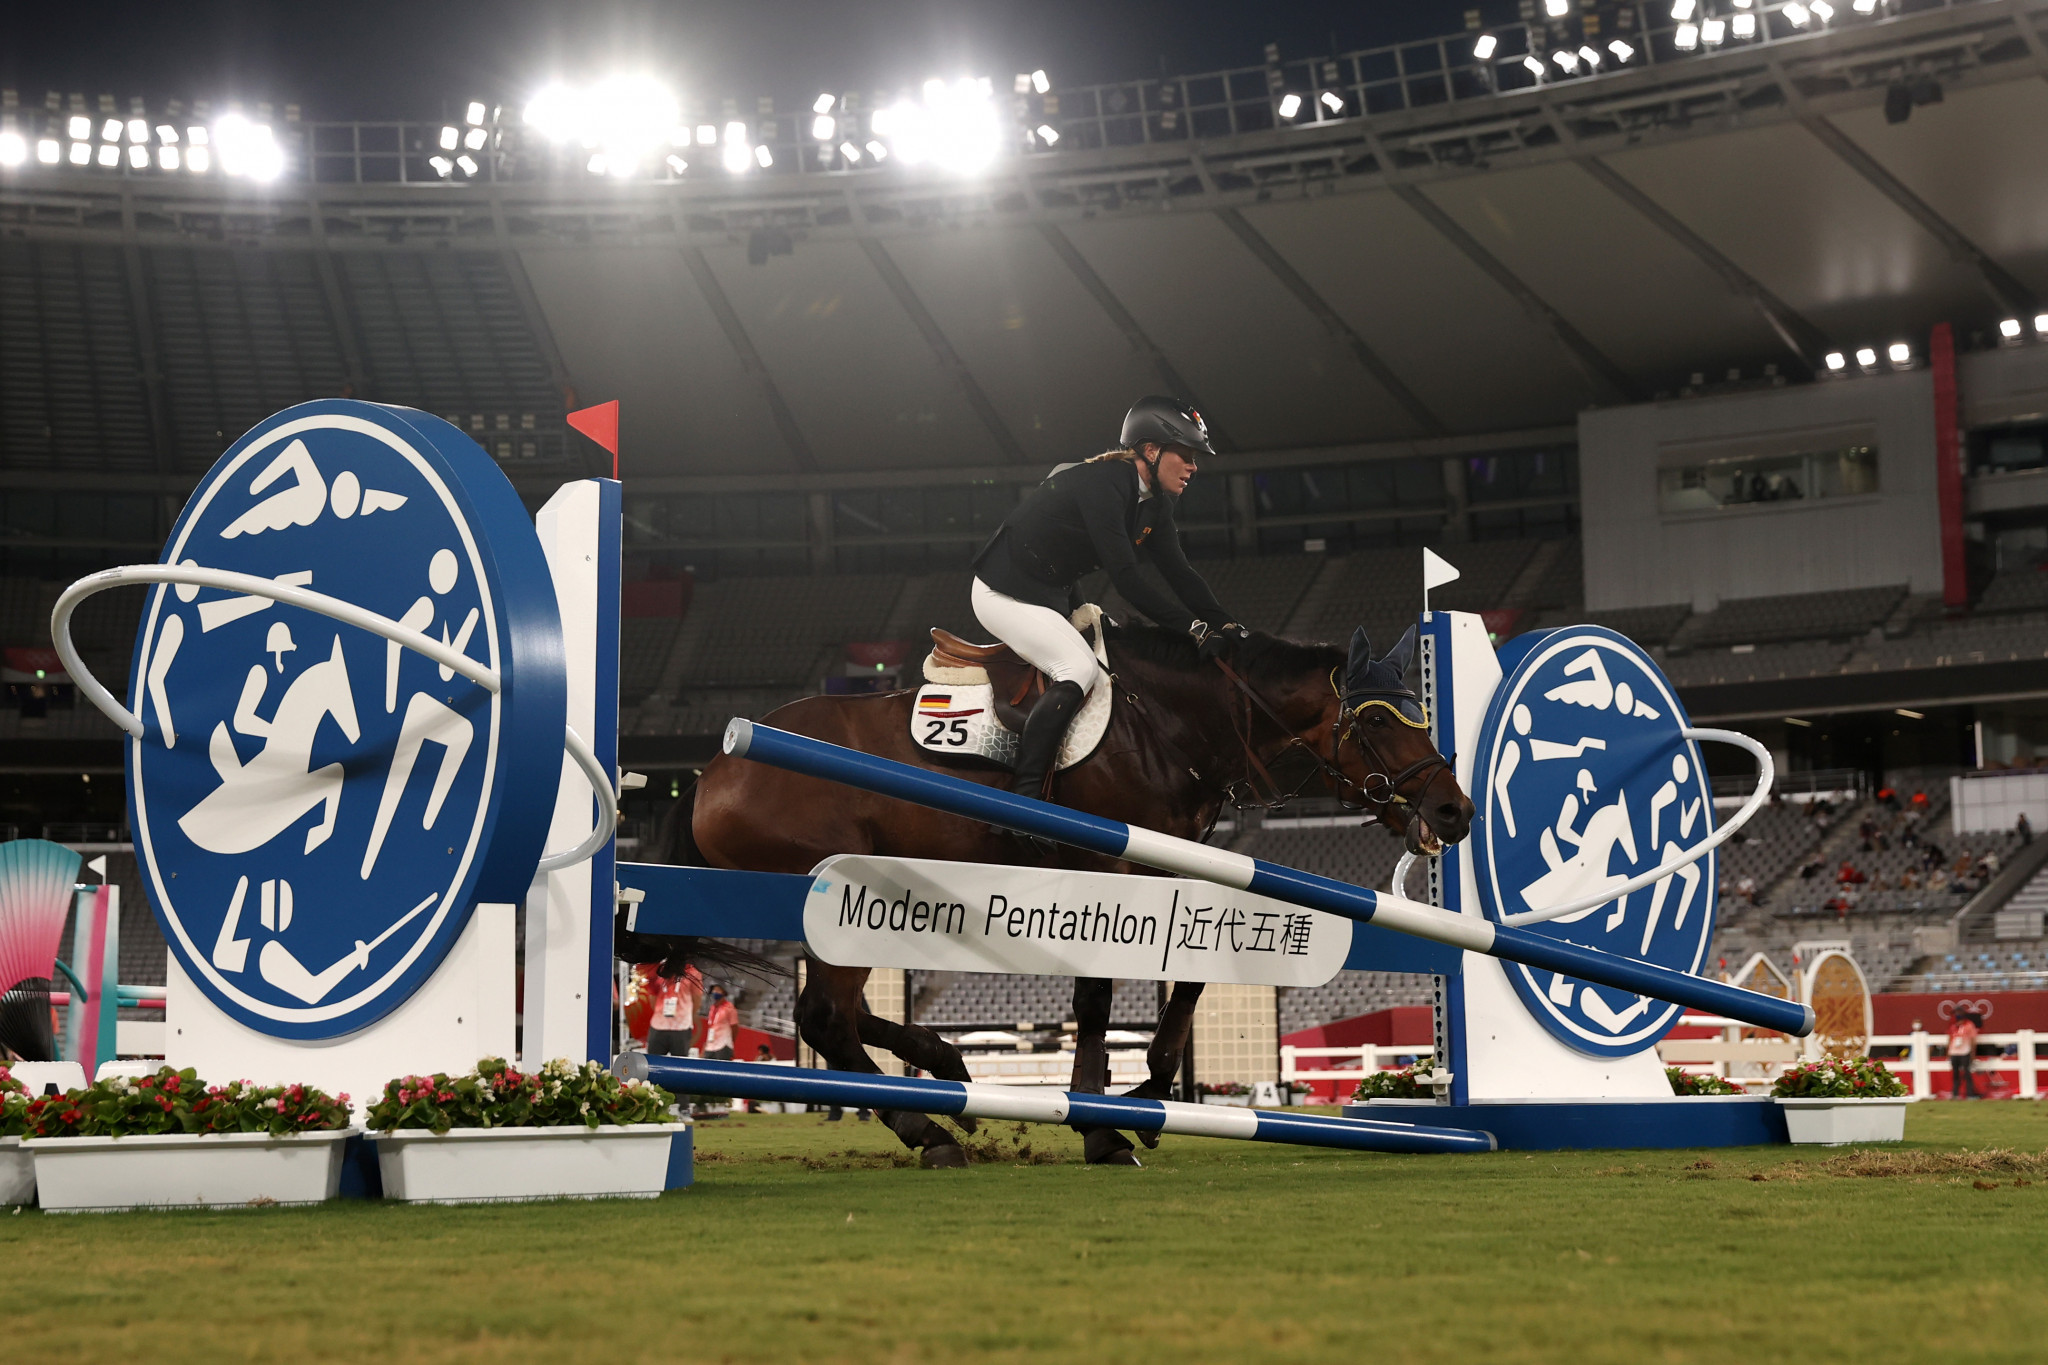 Saint Boy refused to jump during the riding discipline at the Tokyo 2020 Olympics, after which Kim Raisner struck the horse ©Getty Images